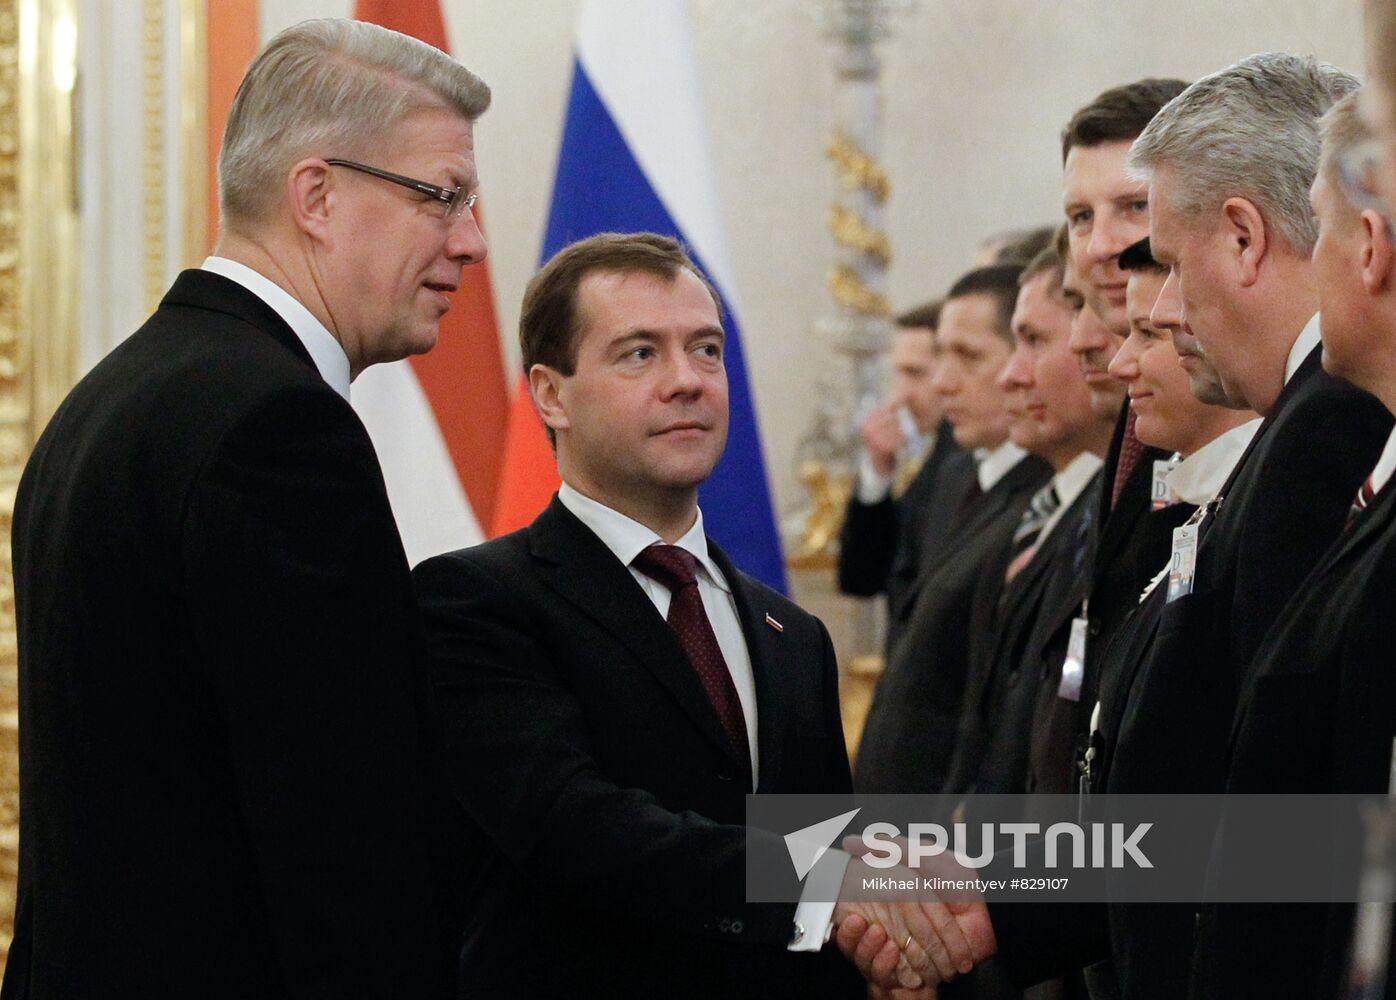 Latvian President on official visit to Russia